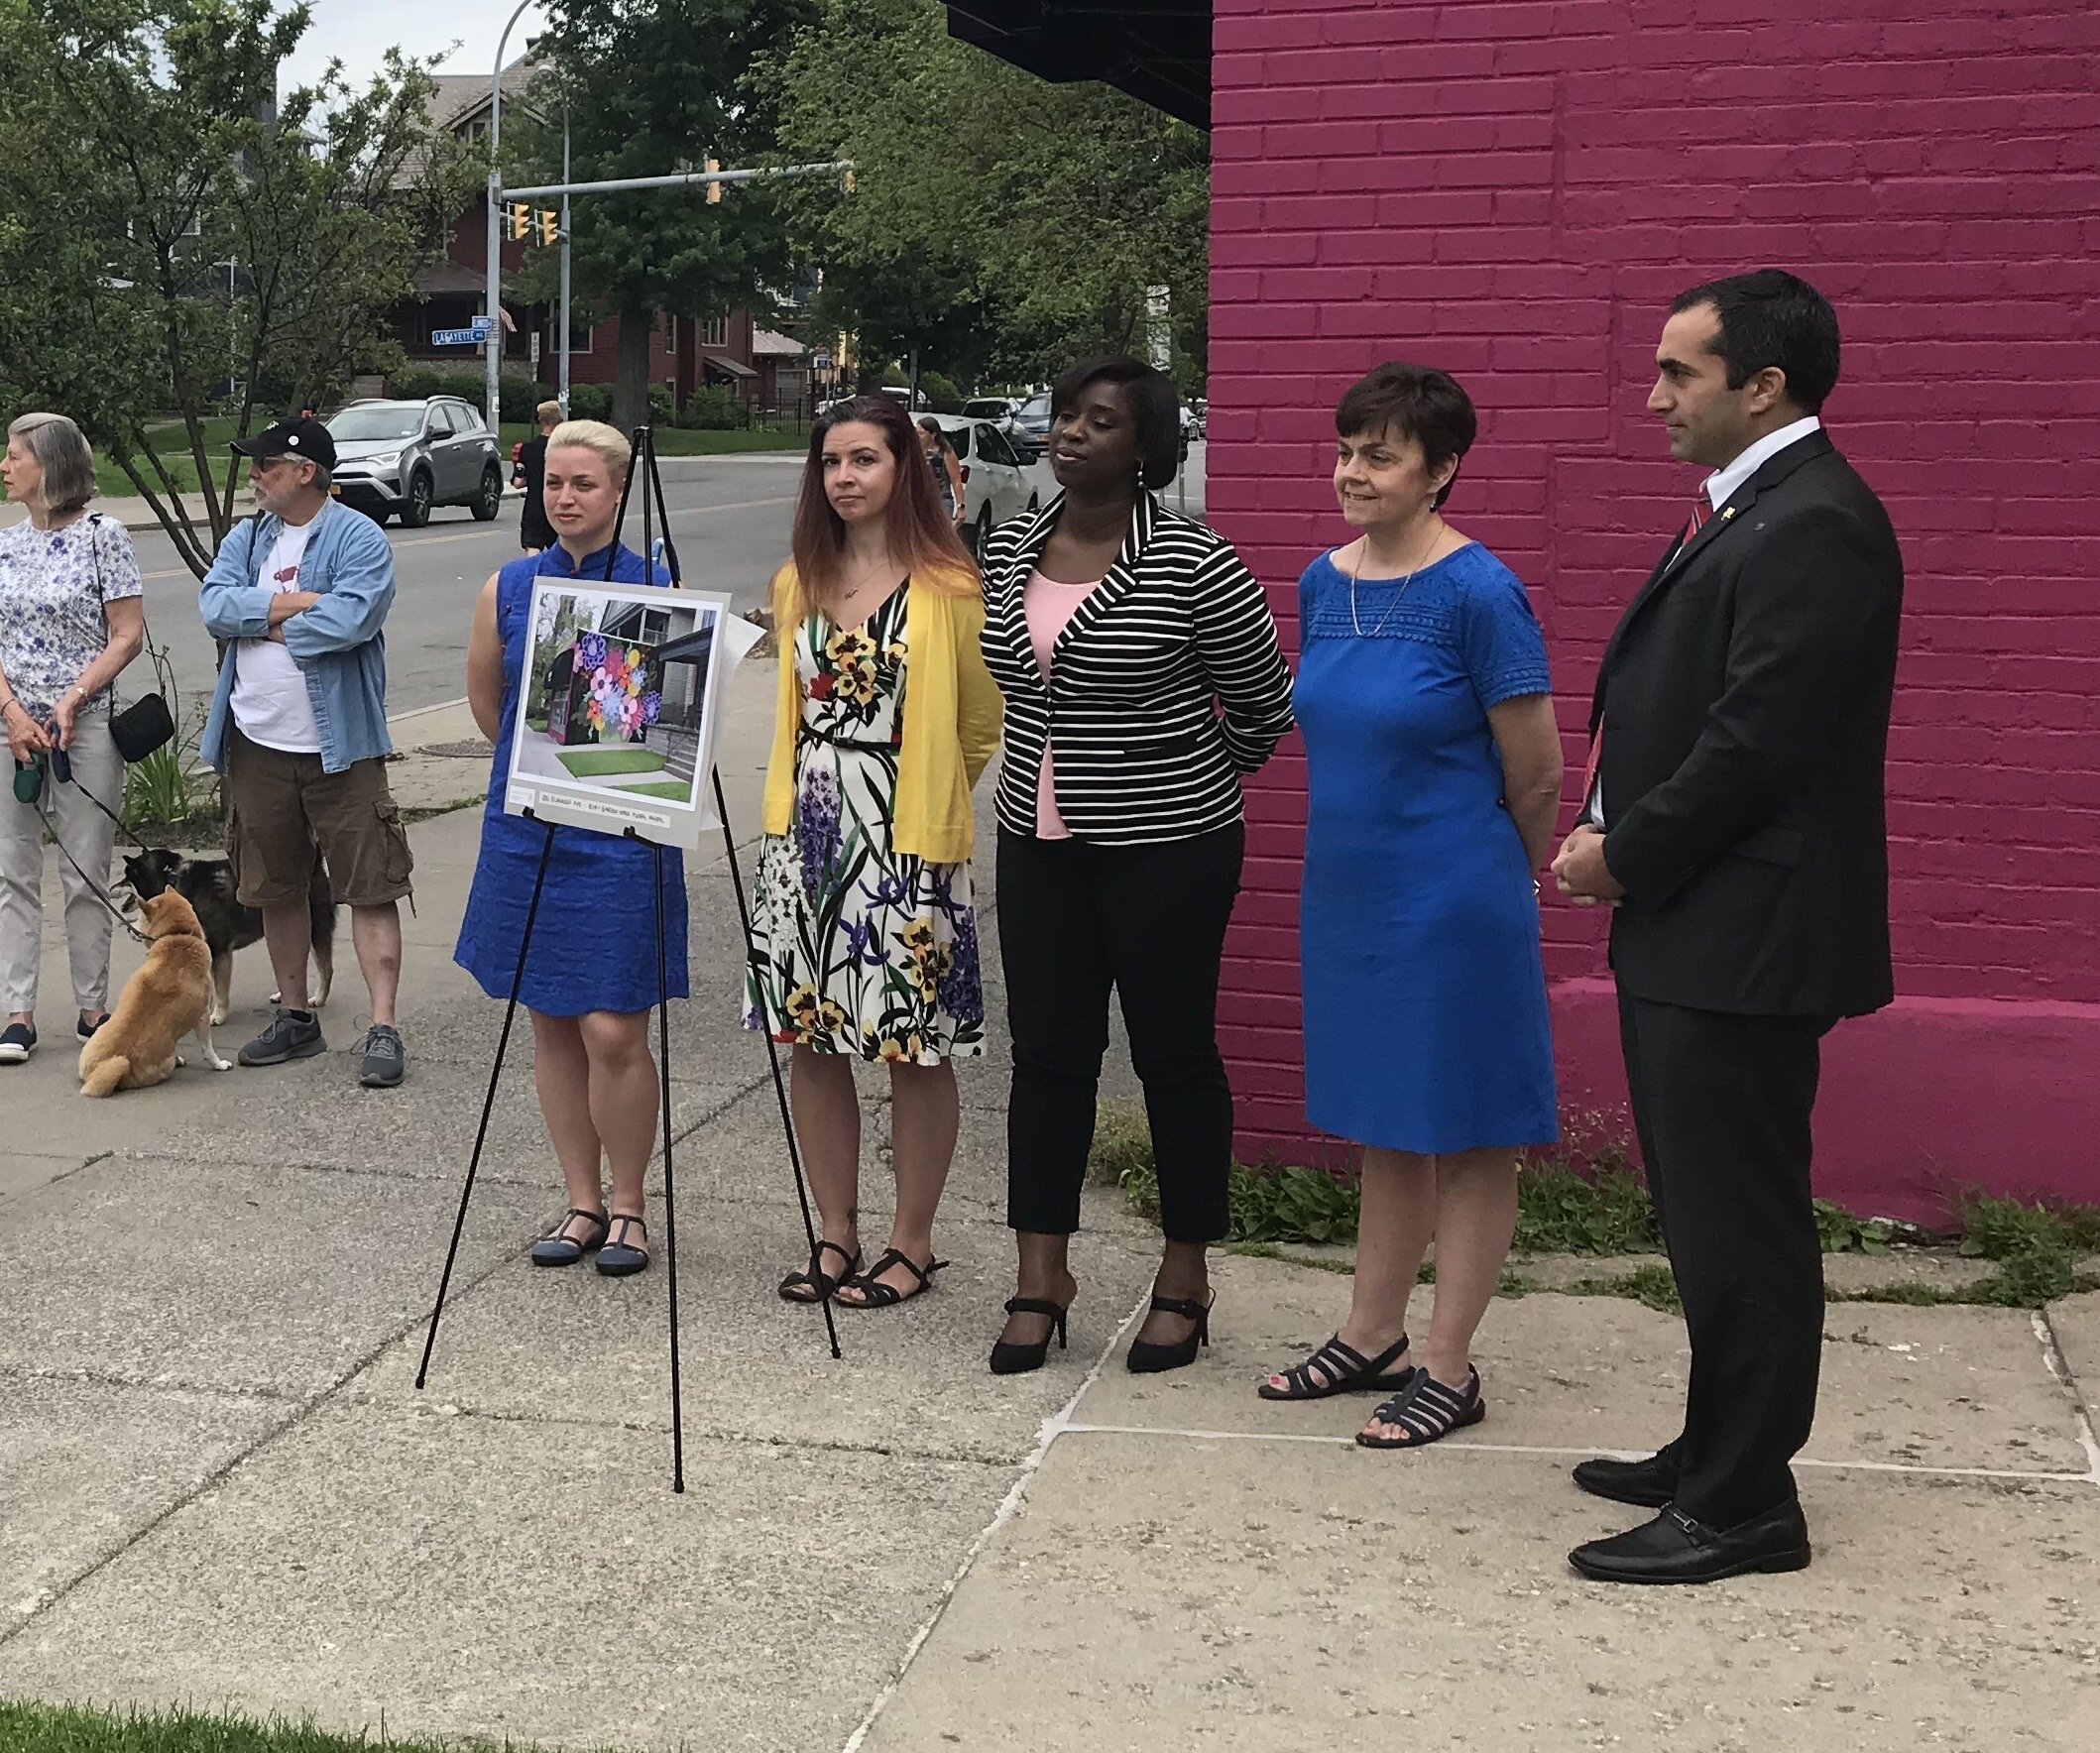 Anouncement Press Conference for 25th anniversary Mural on Elmwood Avenue